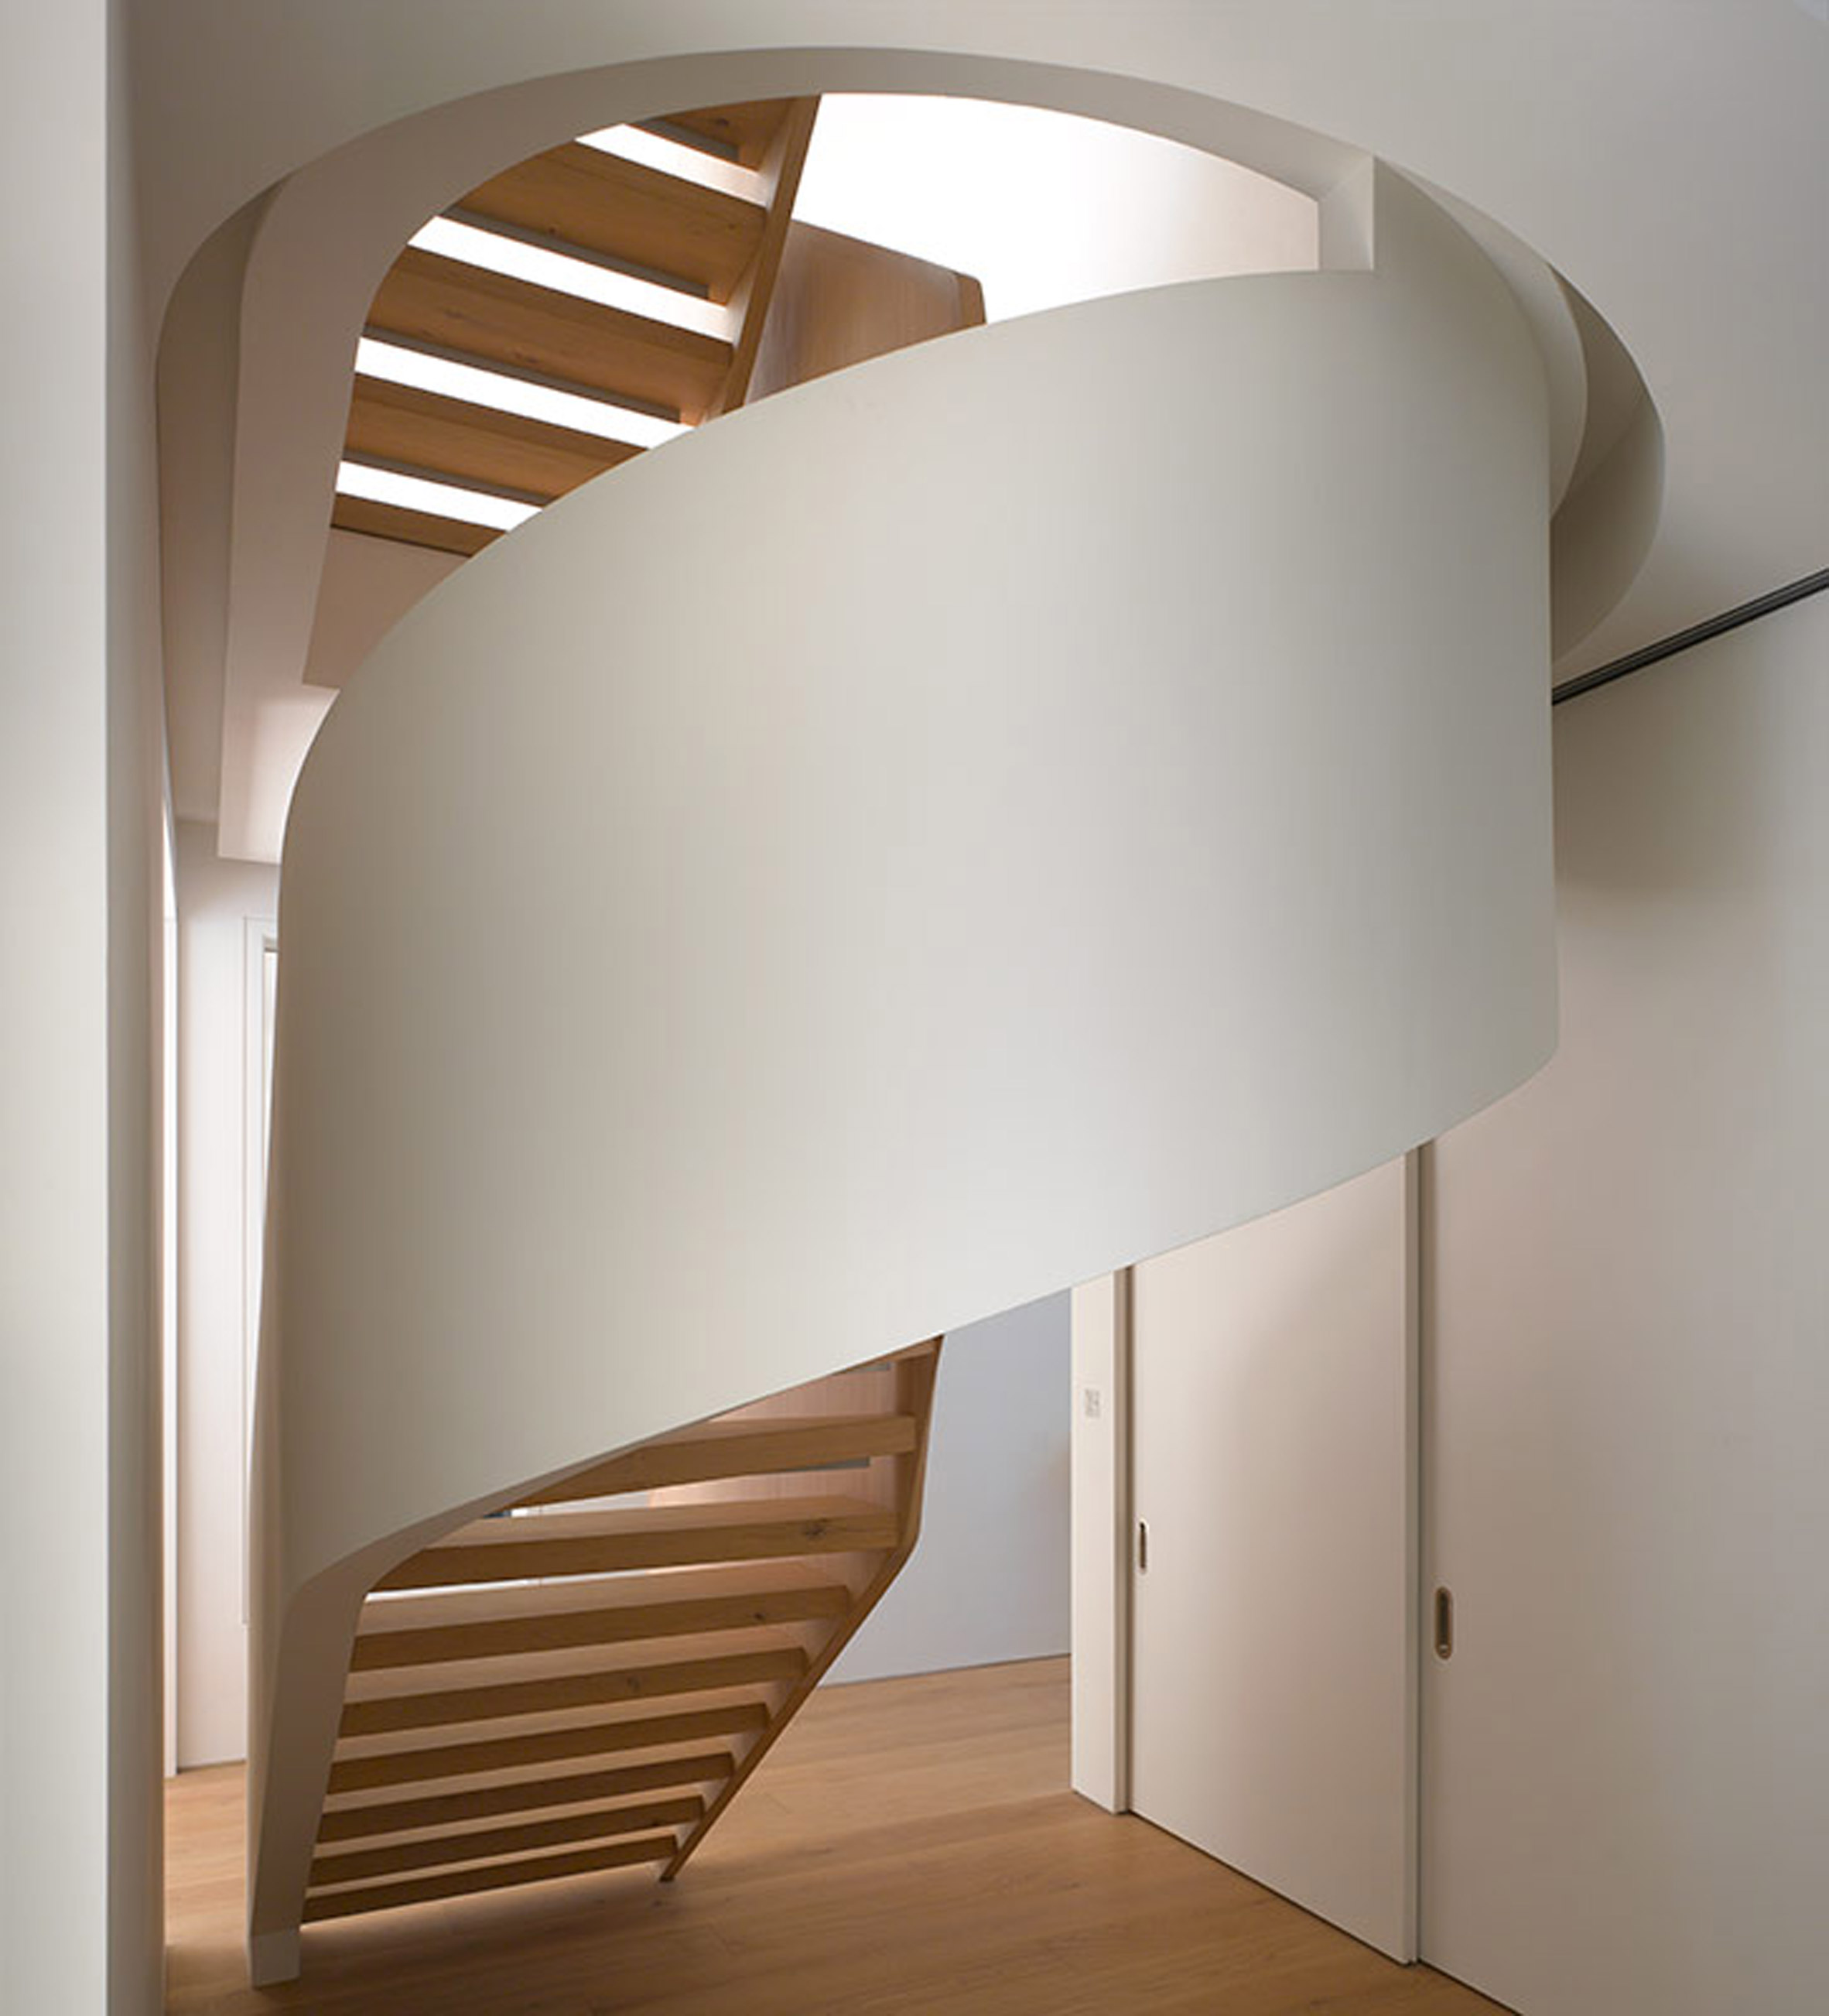 House in Notting Hill Gate by Theis + Khan